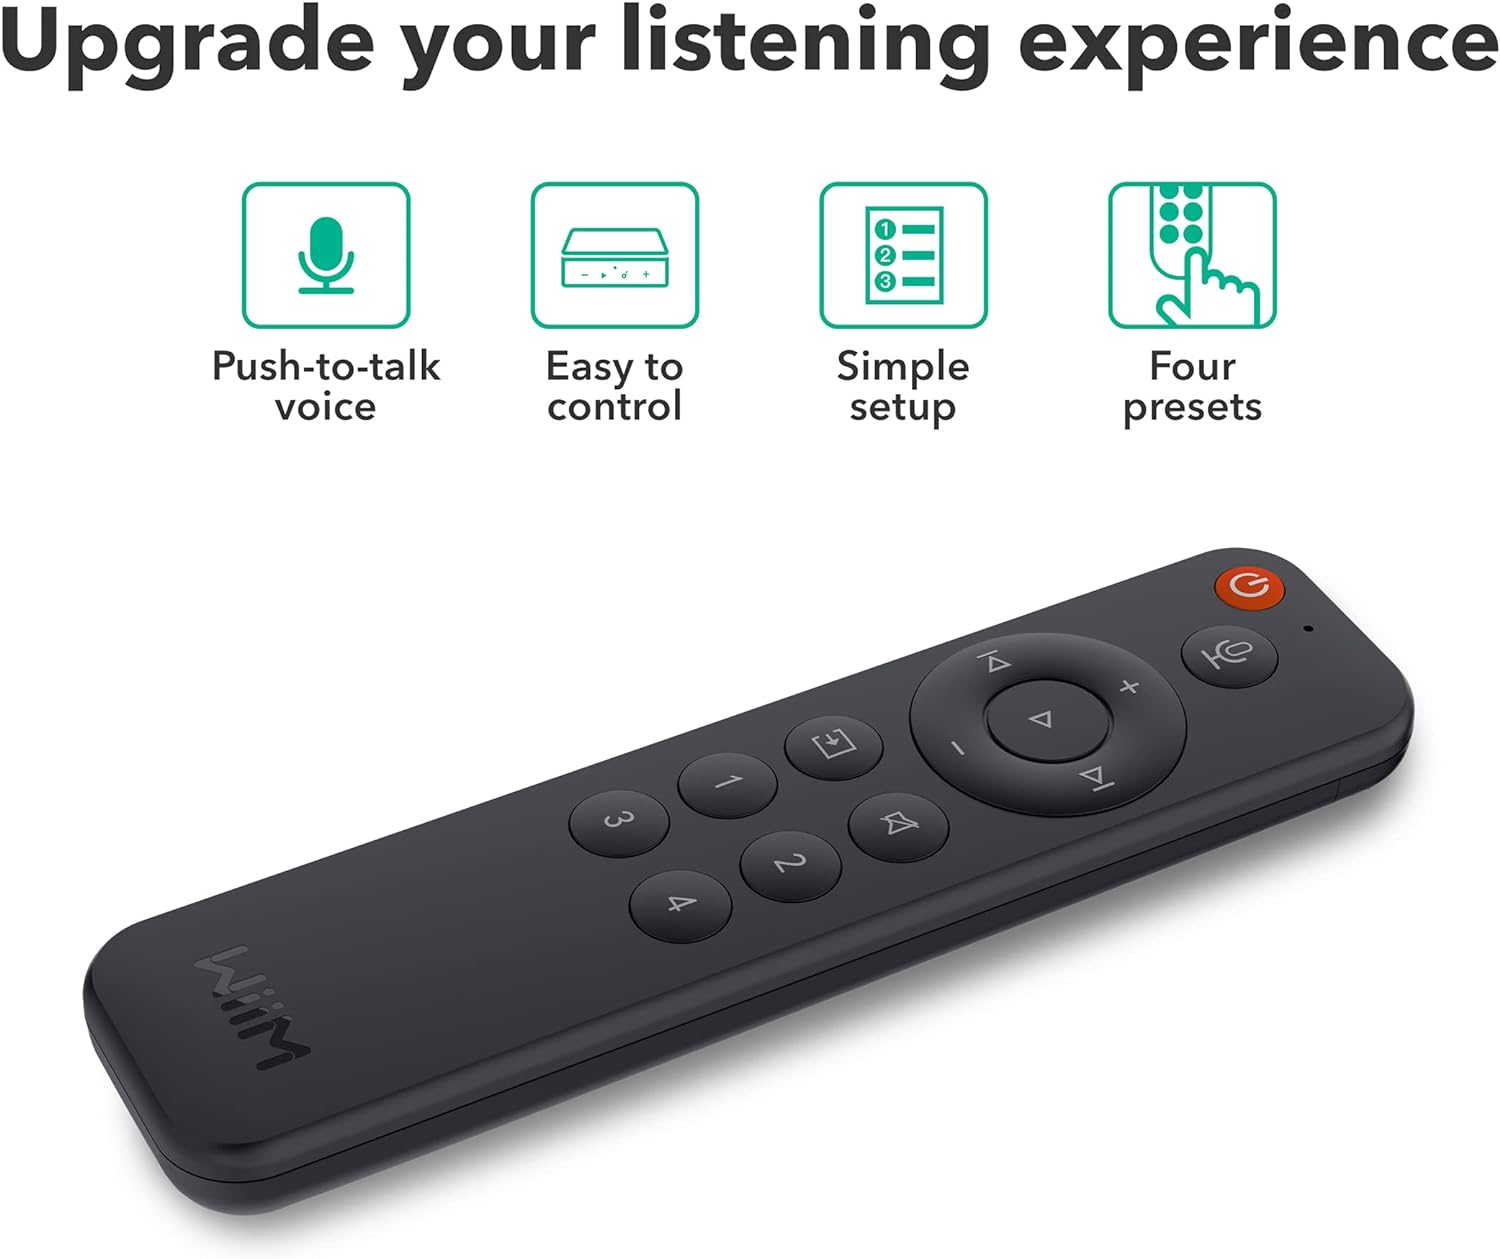  WiiM Pro Plus AirPlay 2 Receiver, Chromecast Audio, Multiroom  Streamer with Premium AKM DAC, Voice Remote, Works with Alexa/Siri/Google,  Stream Hi-Res Audio from Spotify,  Music, Tidal and More : Electronics